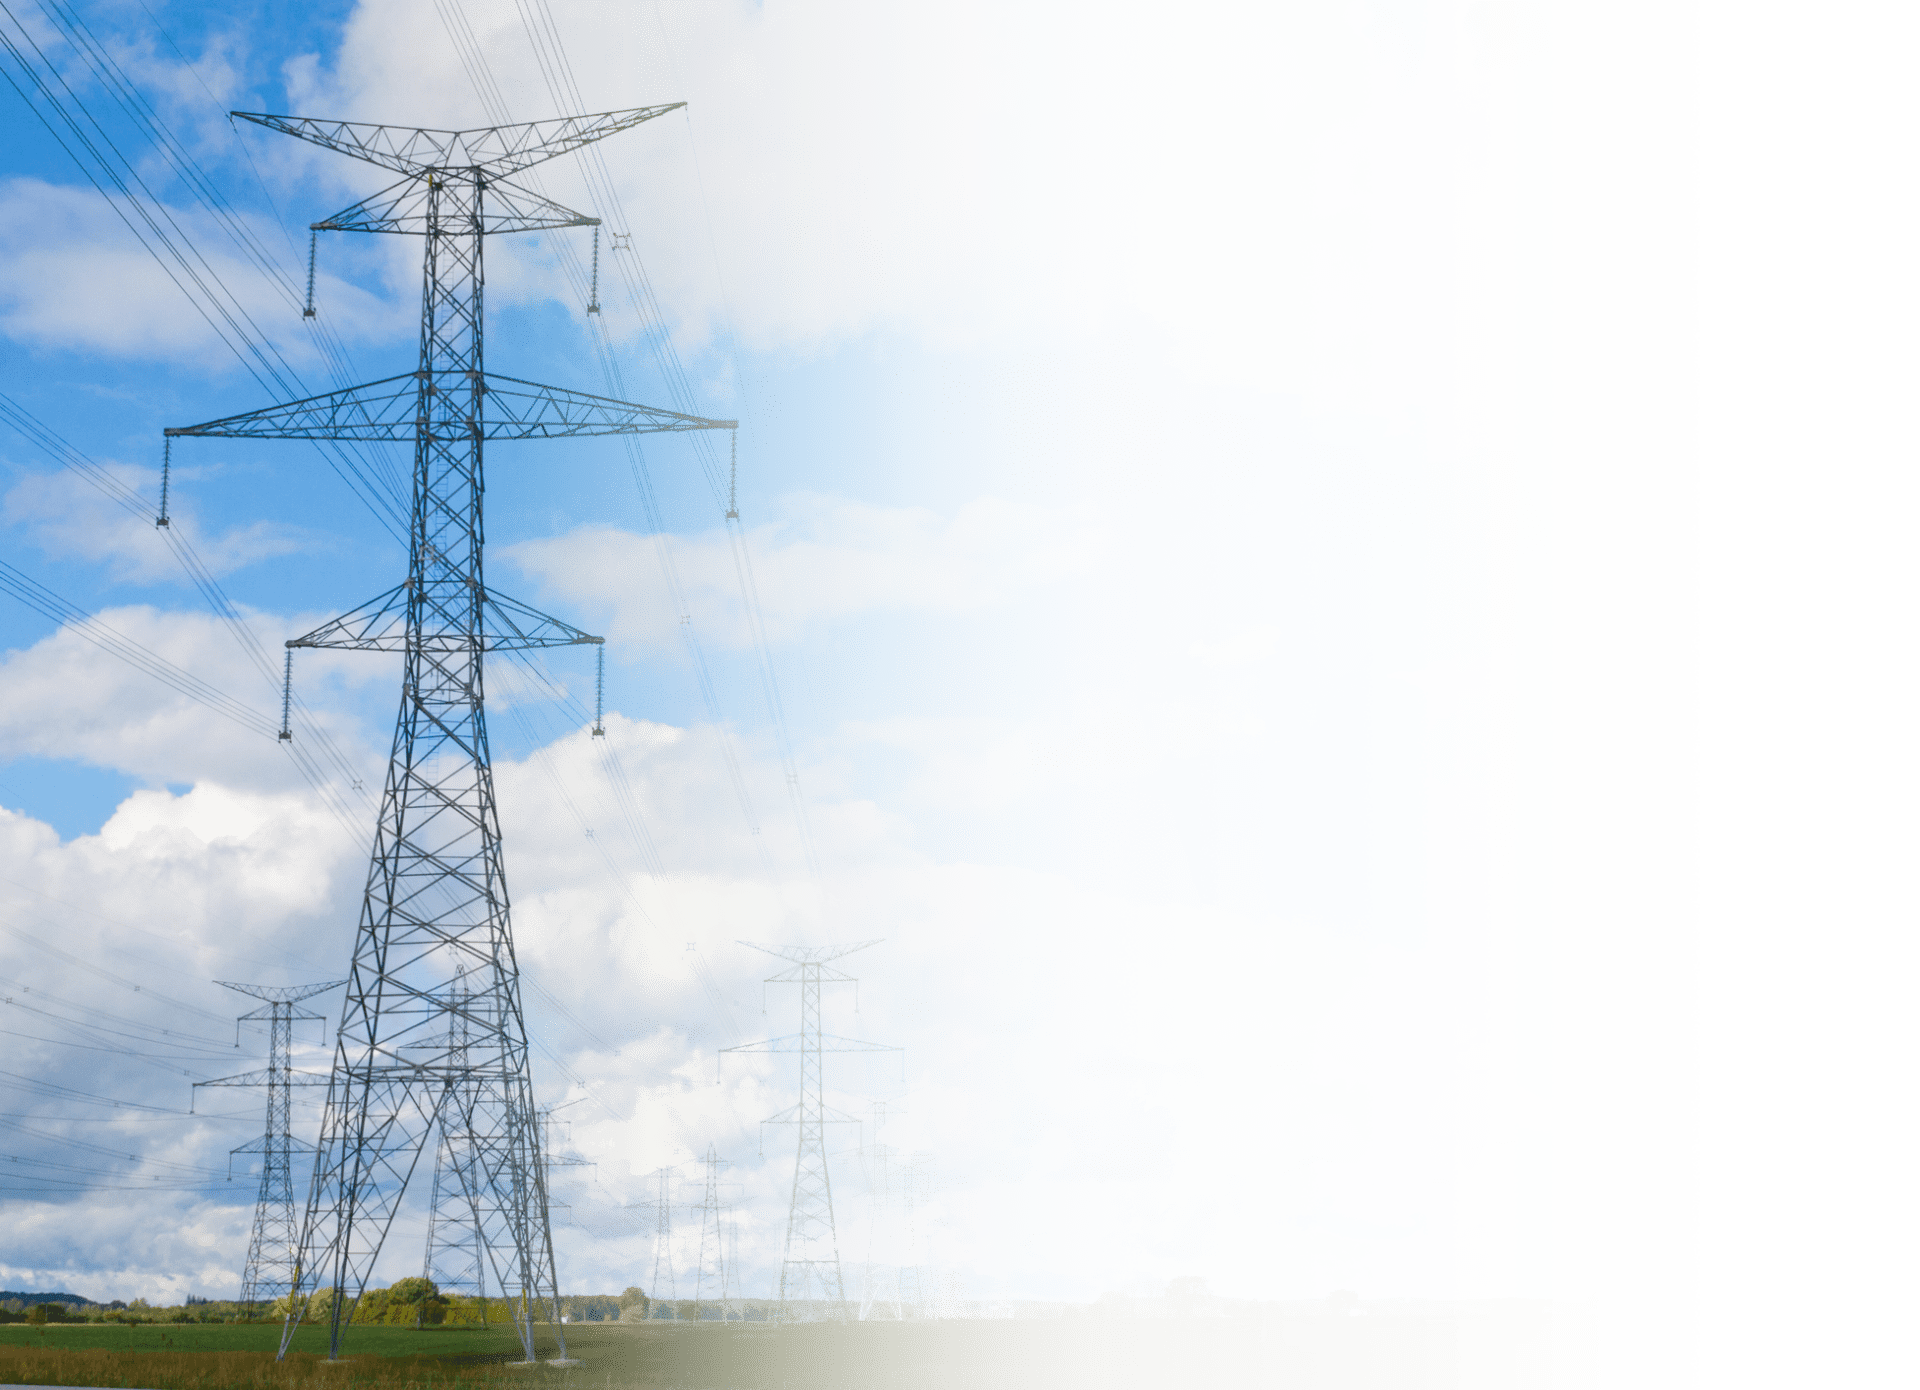 The image is distorted with digital artifacts, showing a landscape with electricity pylons under a blue sky with clouds. Some areas of the image are glitched.